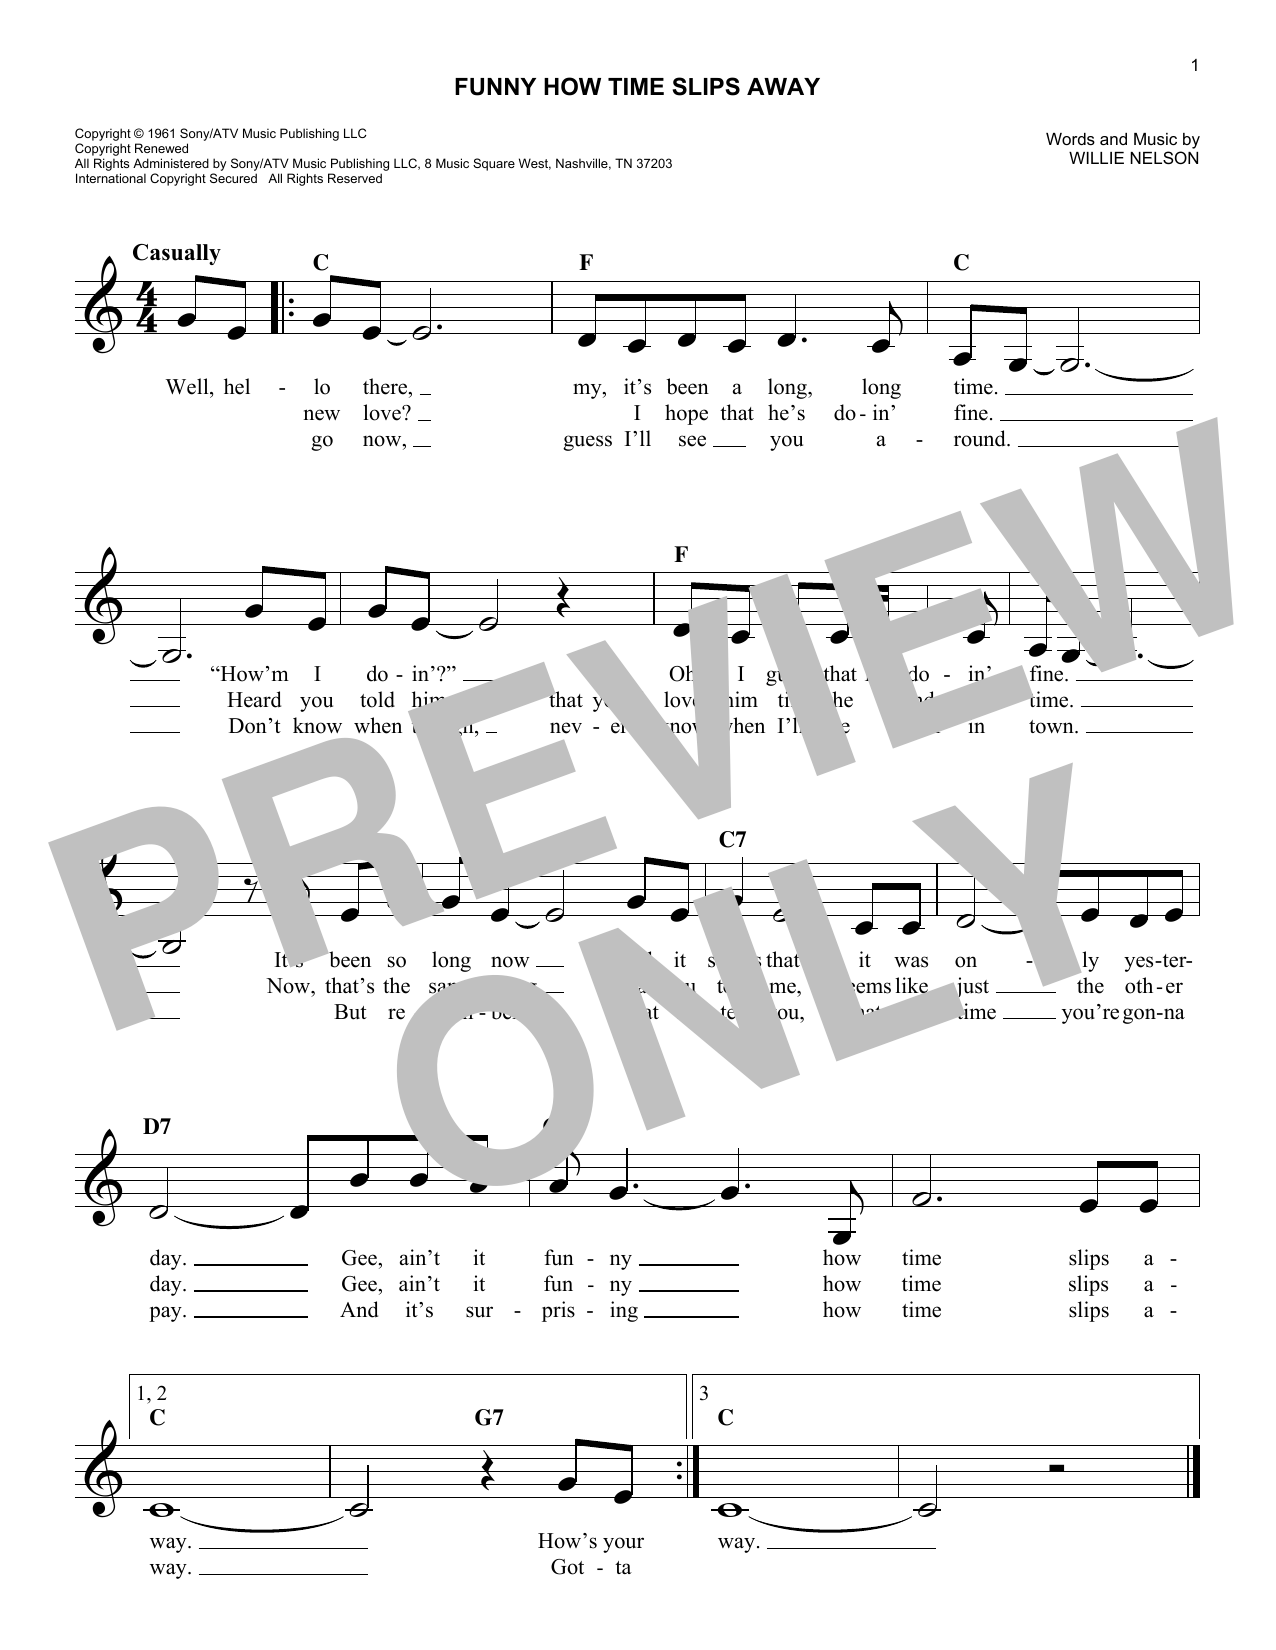 Download Willie Nelson Funny How Time Slips Away Sheet Music